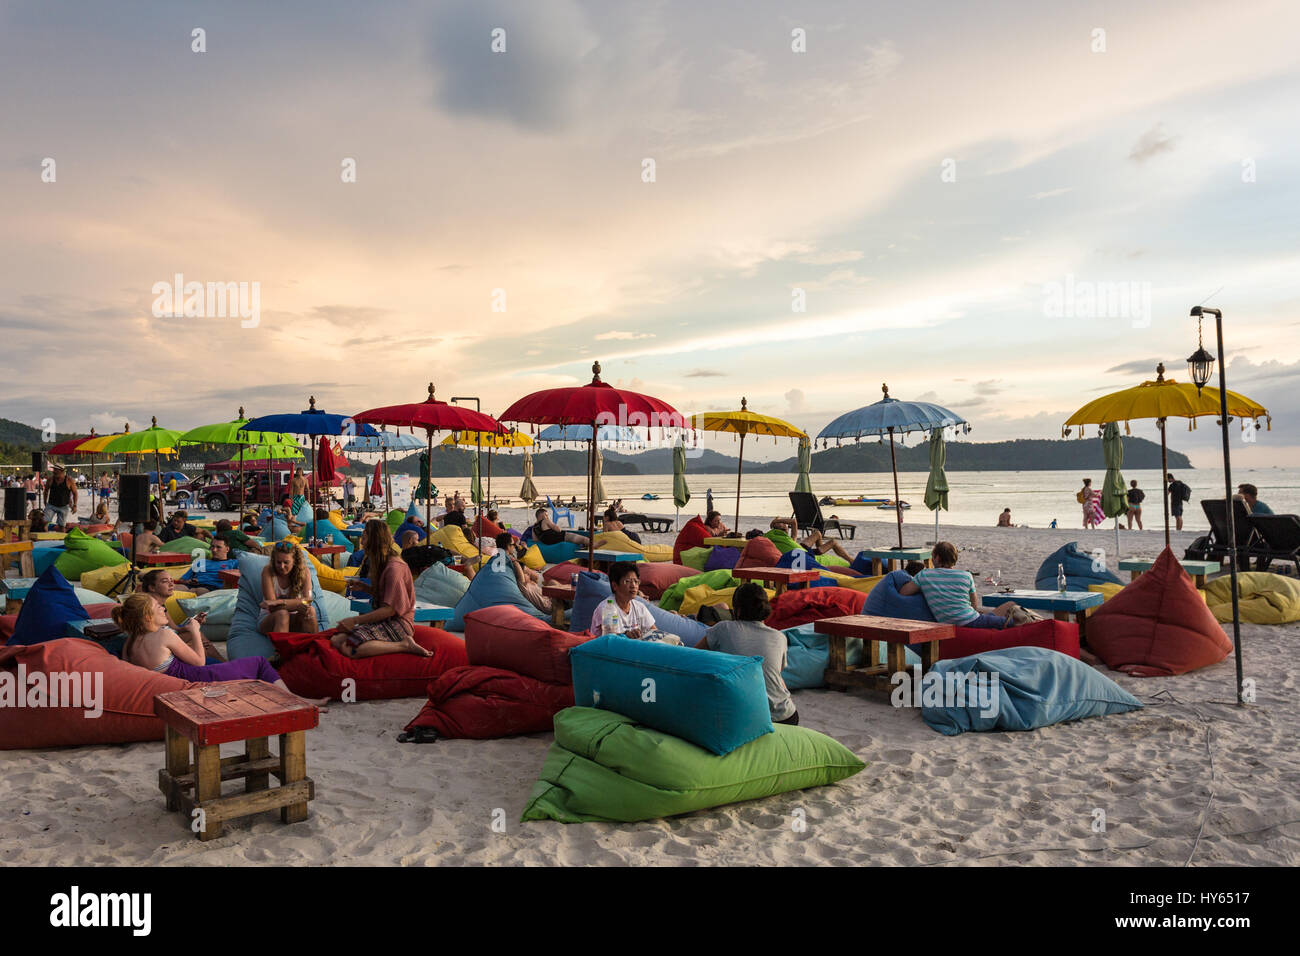 LANGKAWI, MALAYSIA - JANUARY 19, 2017: Tourists enjoy a drink in a beach bar on Cenang beach in Langkawi, an island in the Andaman sea in Malaysia Stock Photo